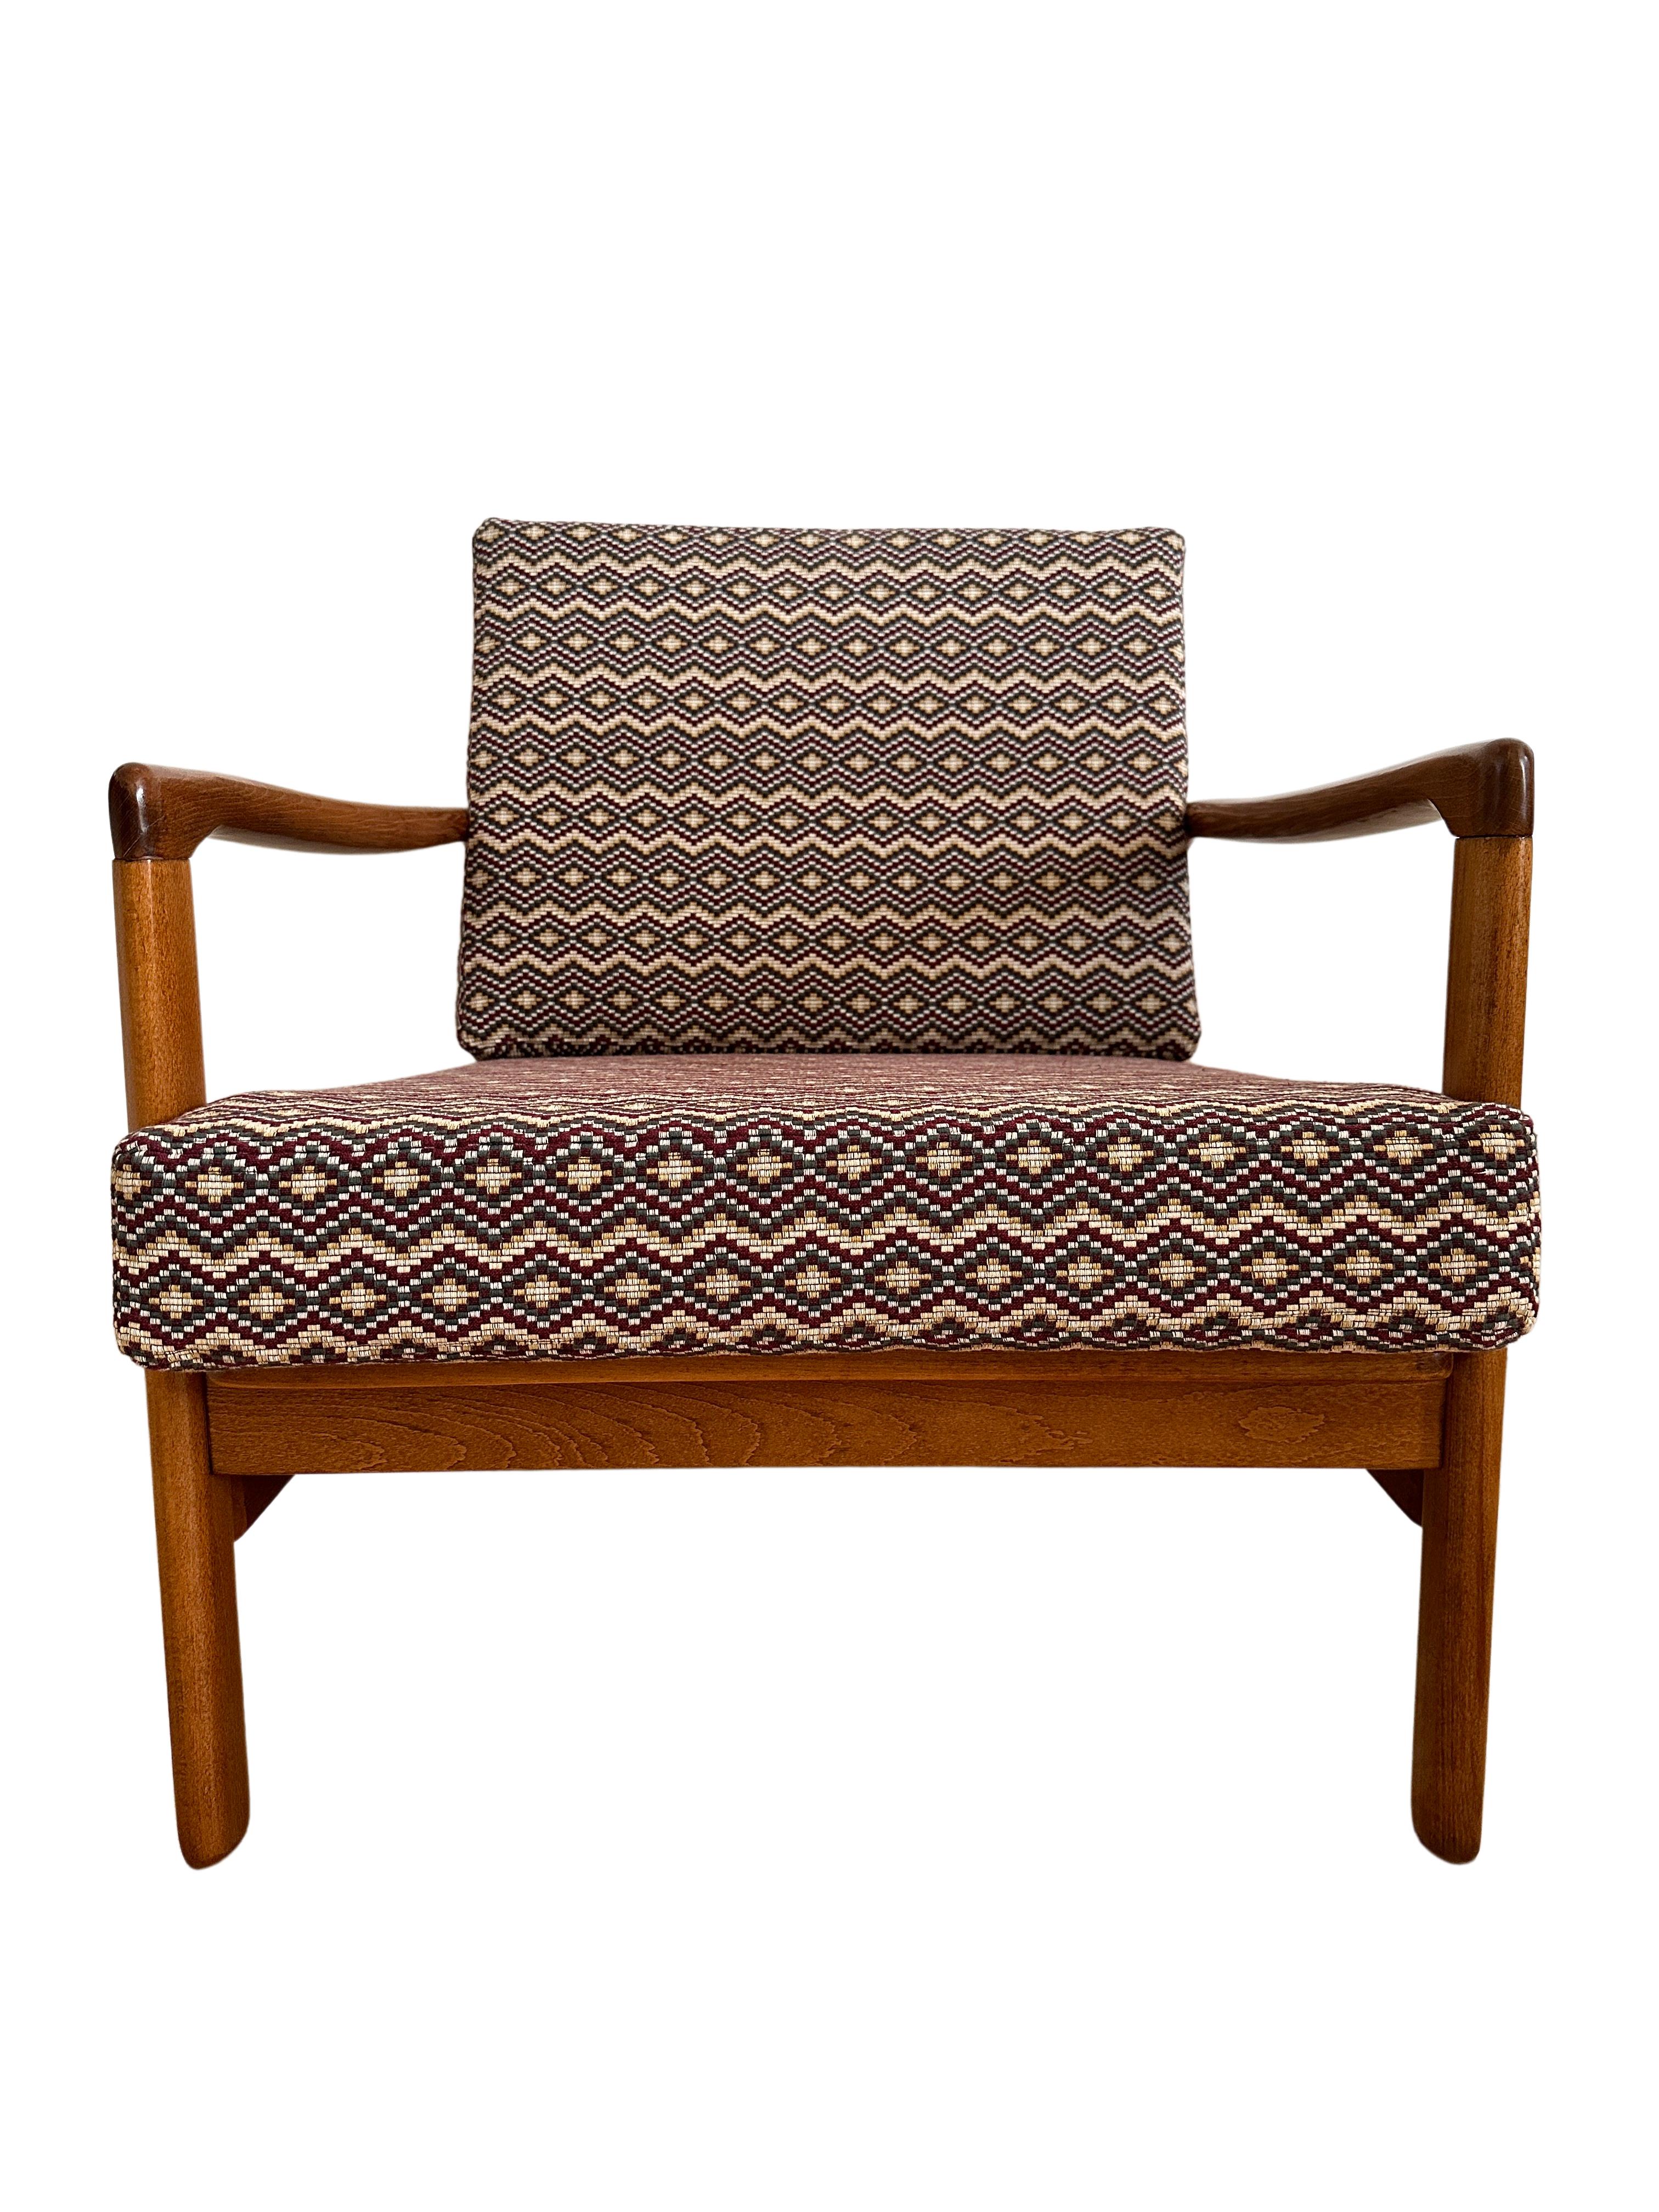 20th Century Set of Two Armchairs, Light Wood, Gaston Y Daniela Upholstery, Europe, 1960s For Sale